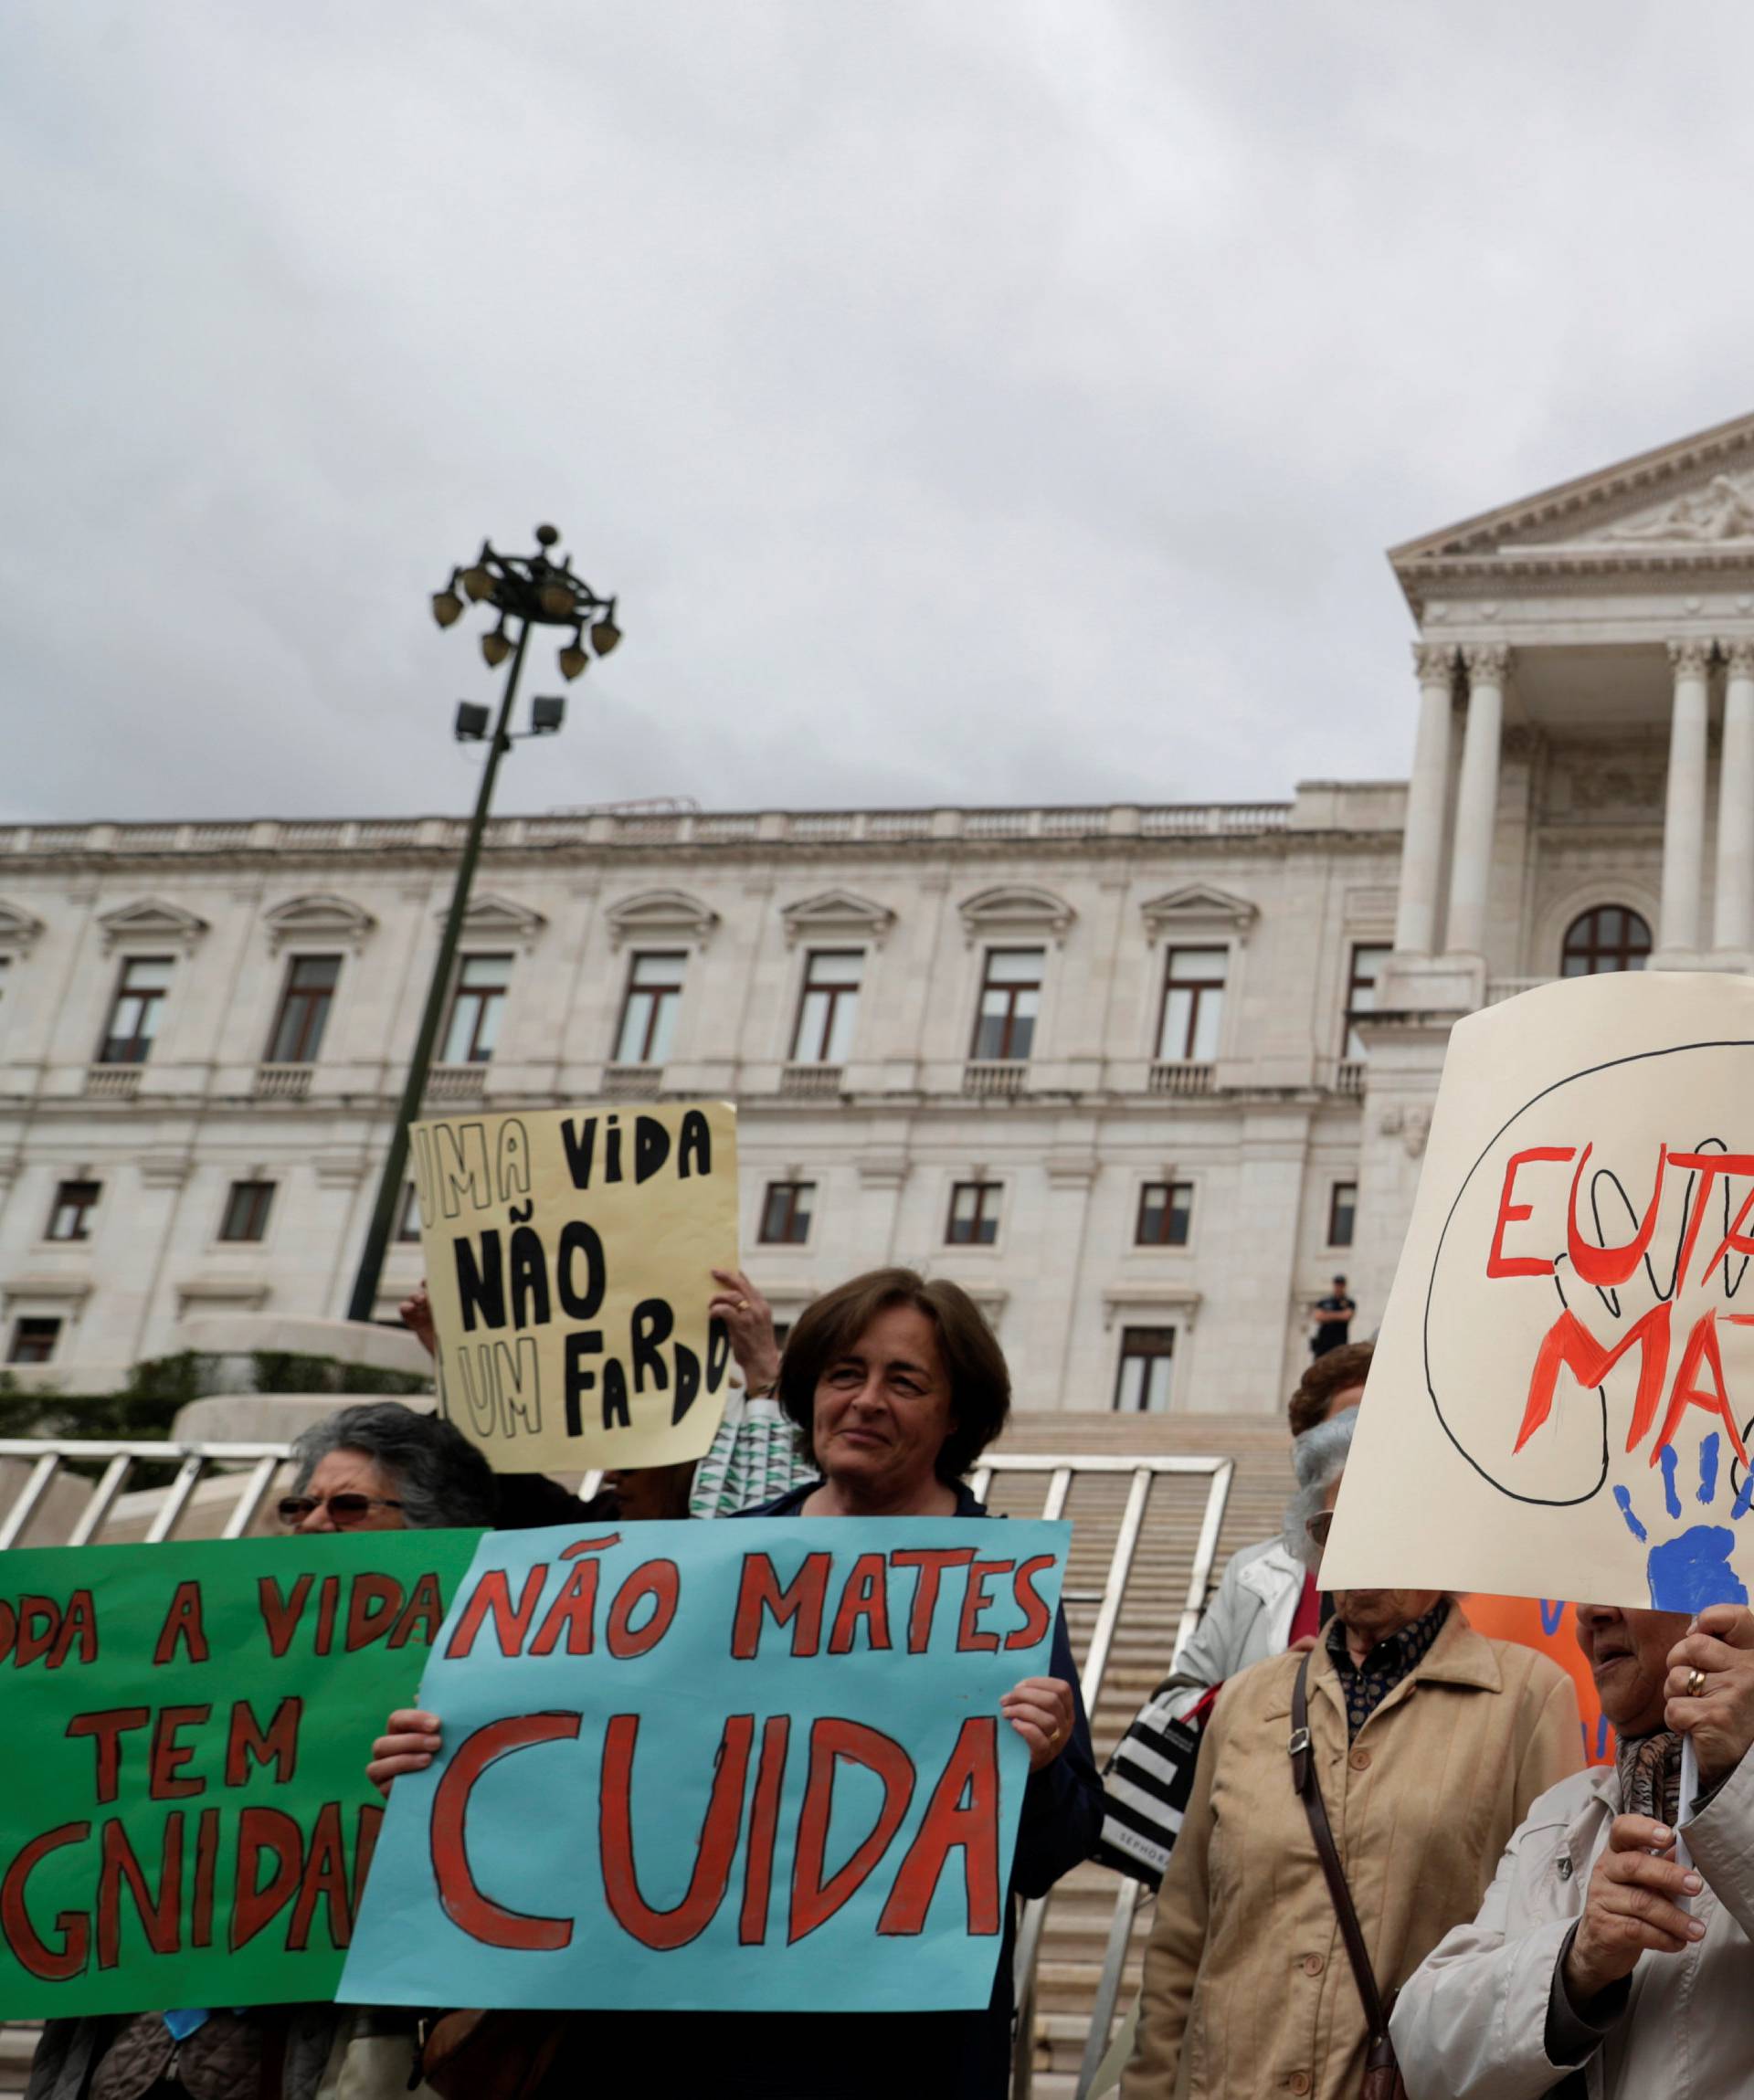 Demonstrators attend a protest against euthanasia in front off the parliament in Lisbon